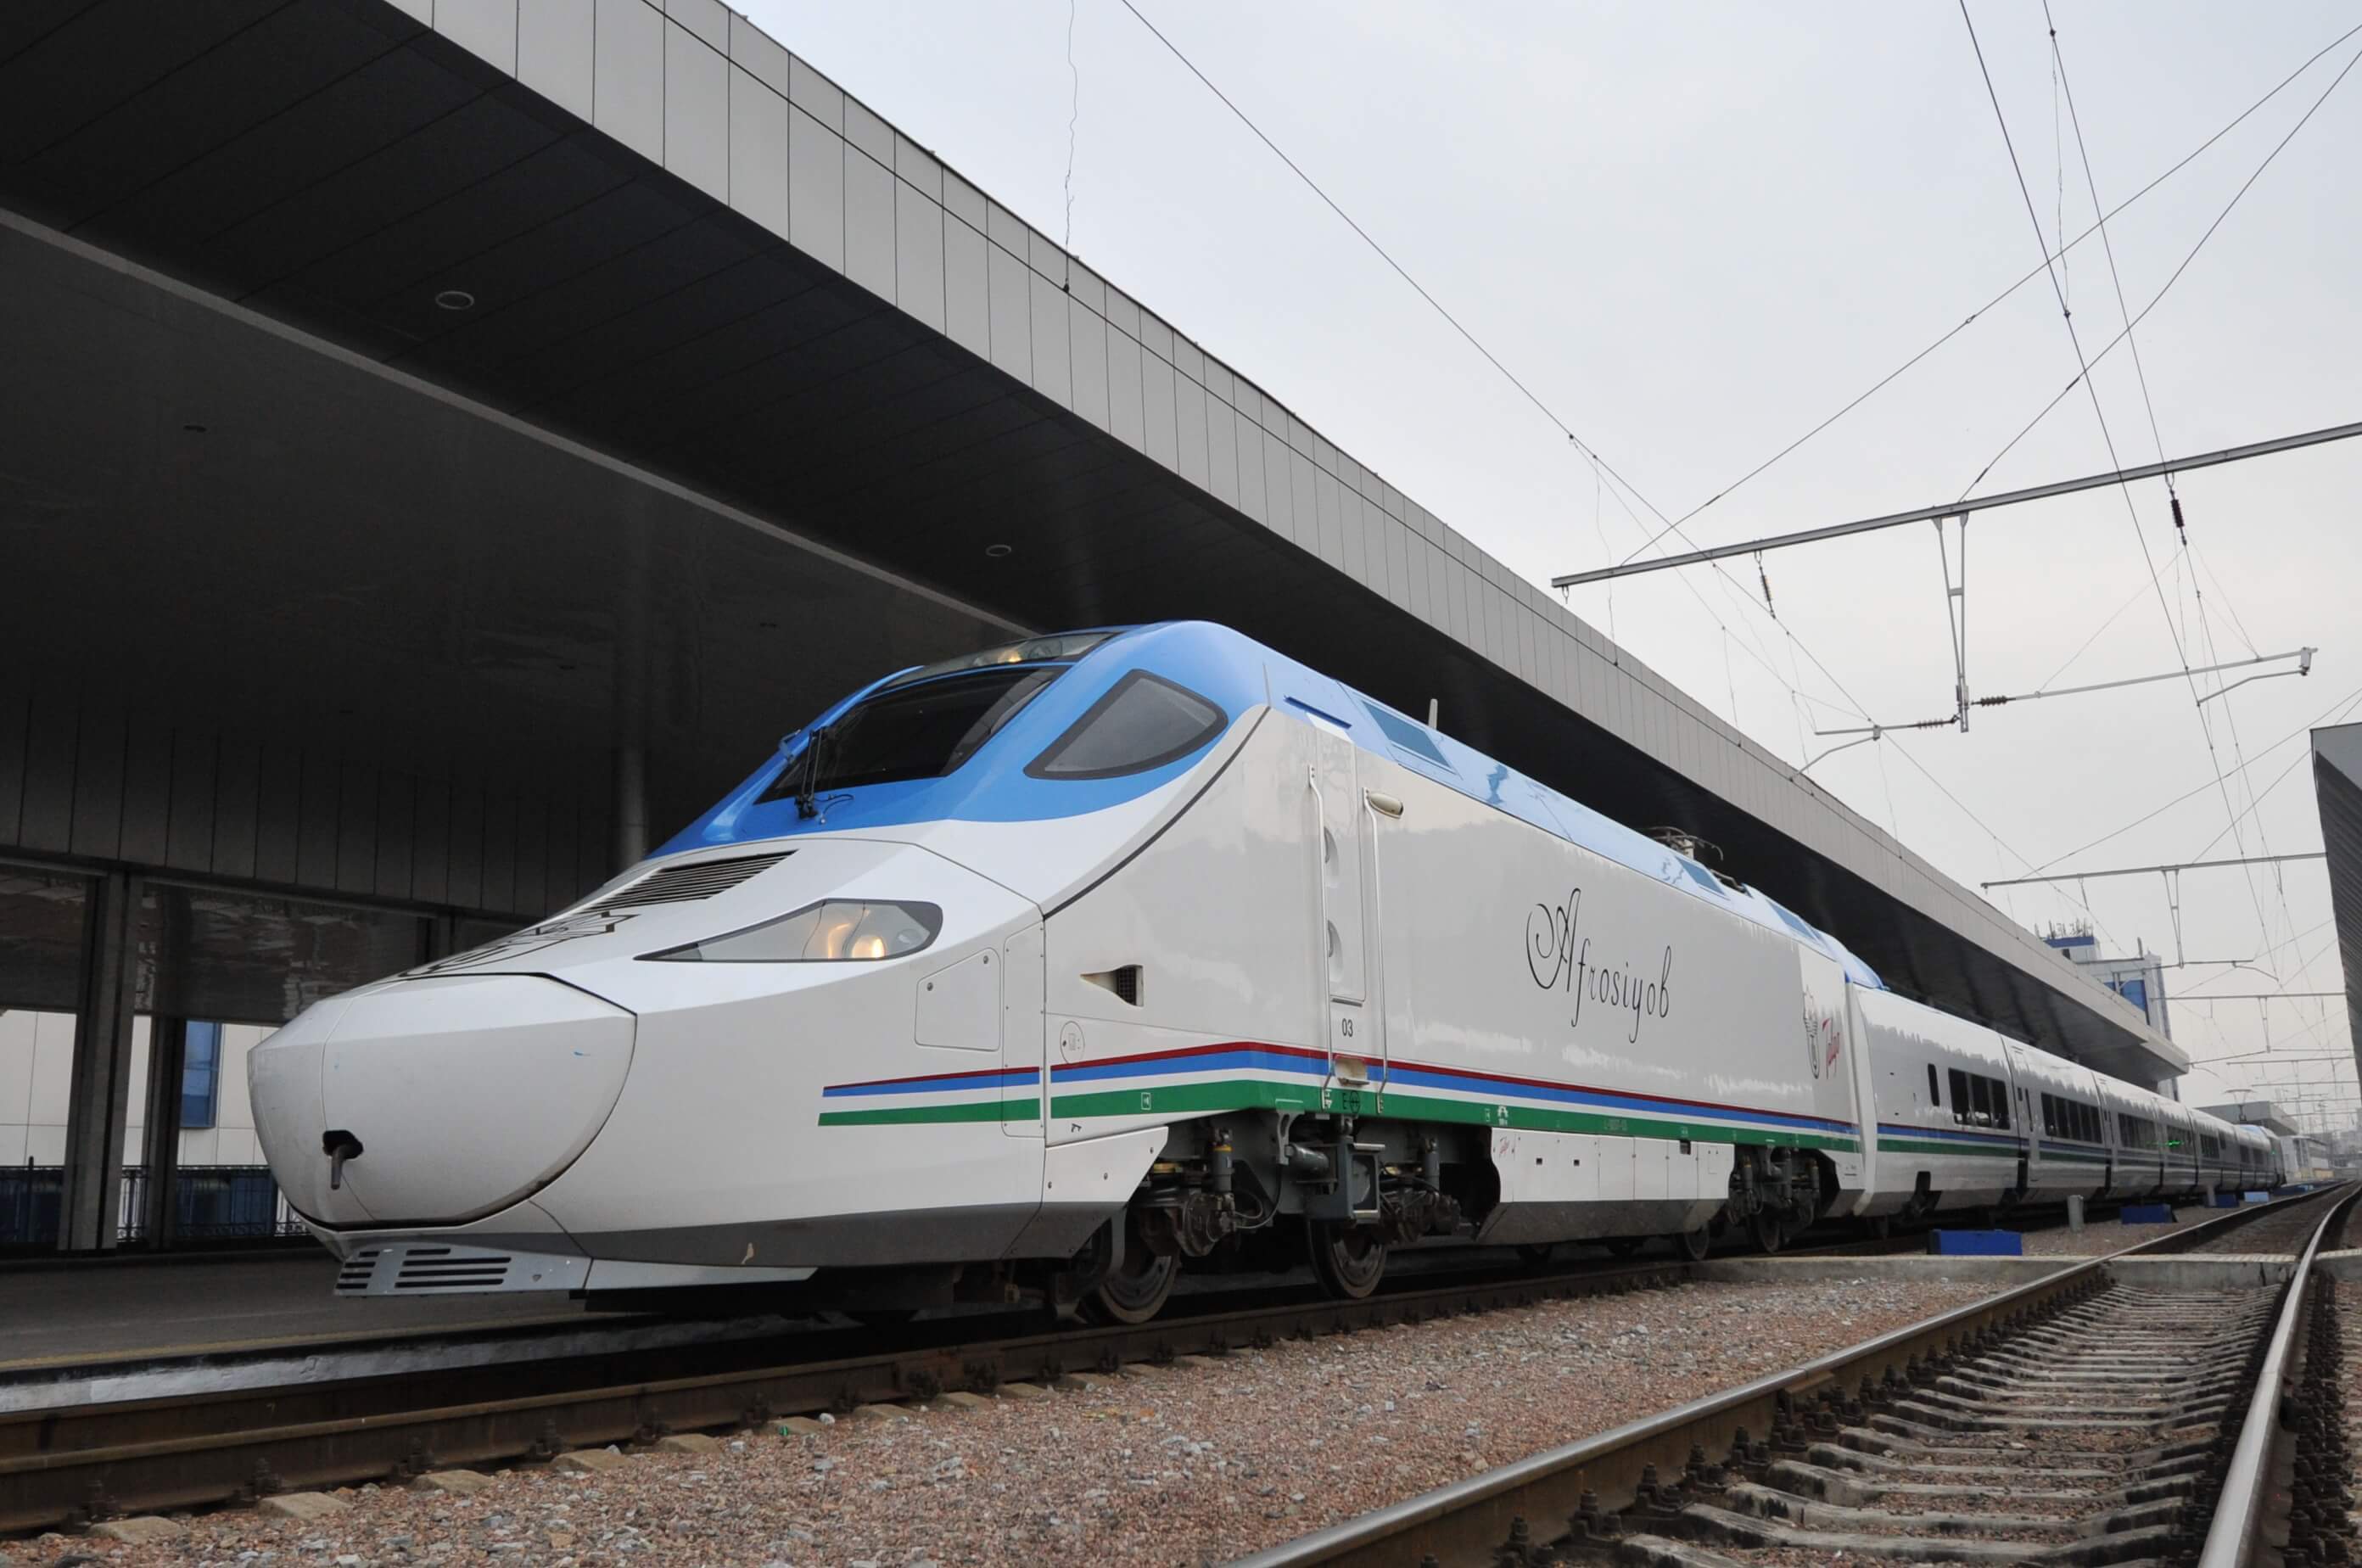 Talgo 250 Afrosiyob for operation on both electrified and non-electrified lines